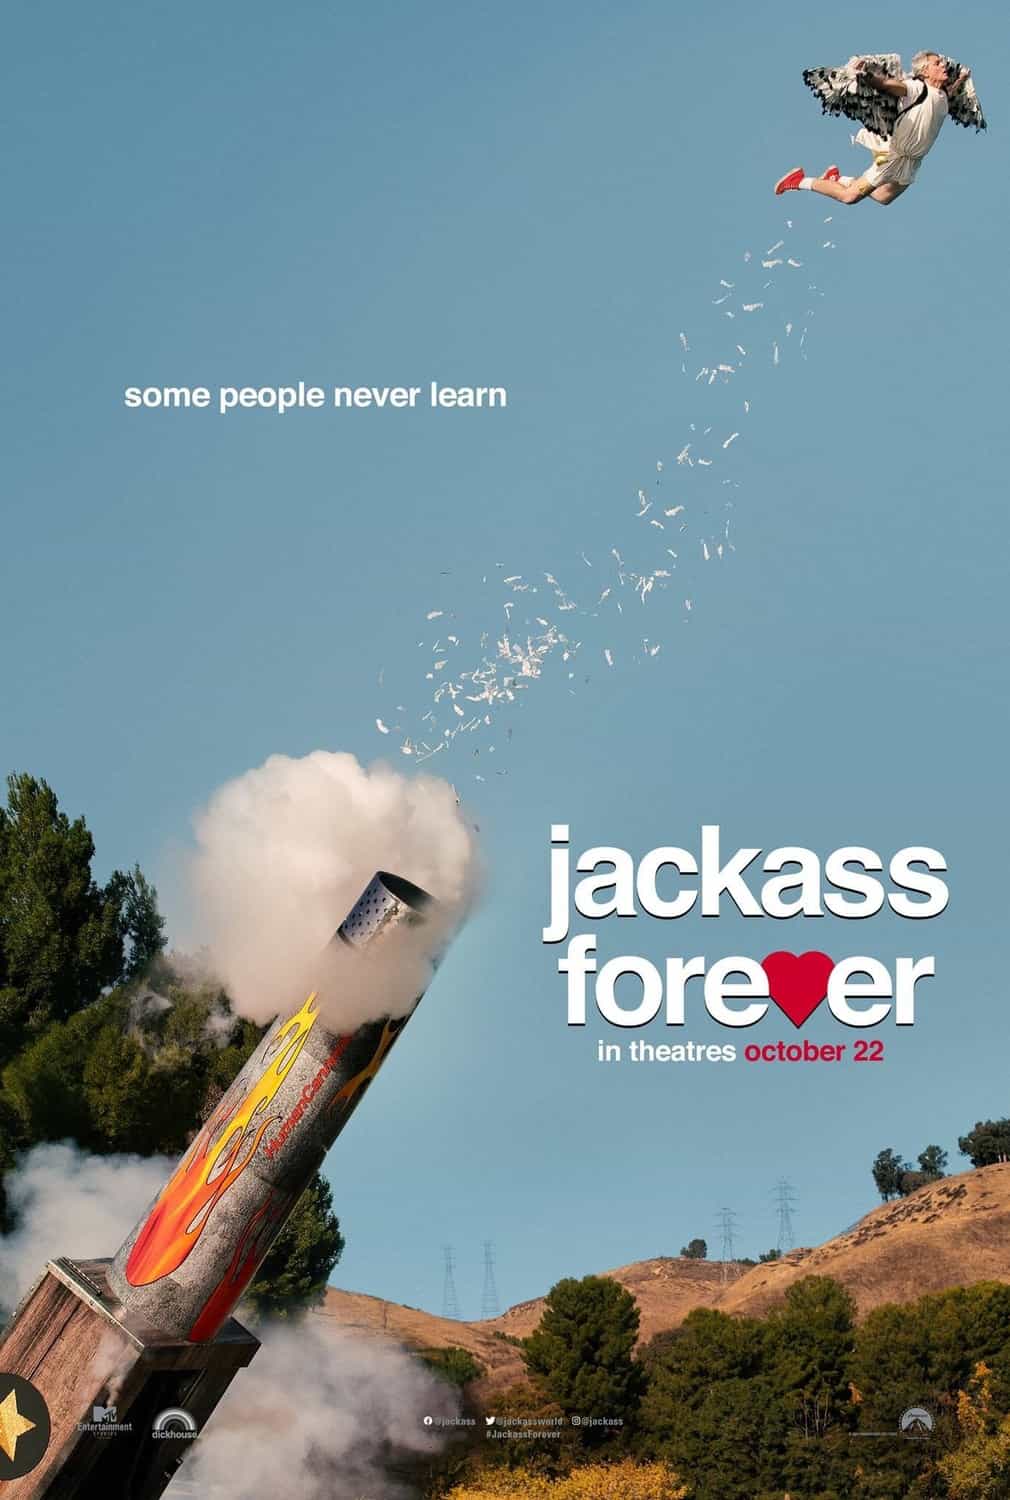 US Box Office Figures 4th - 6th February 2022: Jackass Forever makes its debut at the top of the US box office as the long running series makes its cinematic return